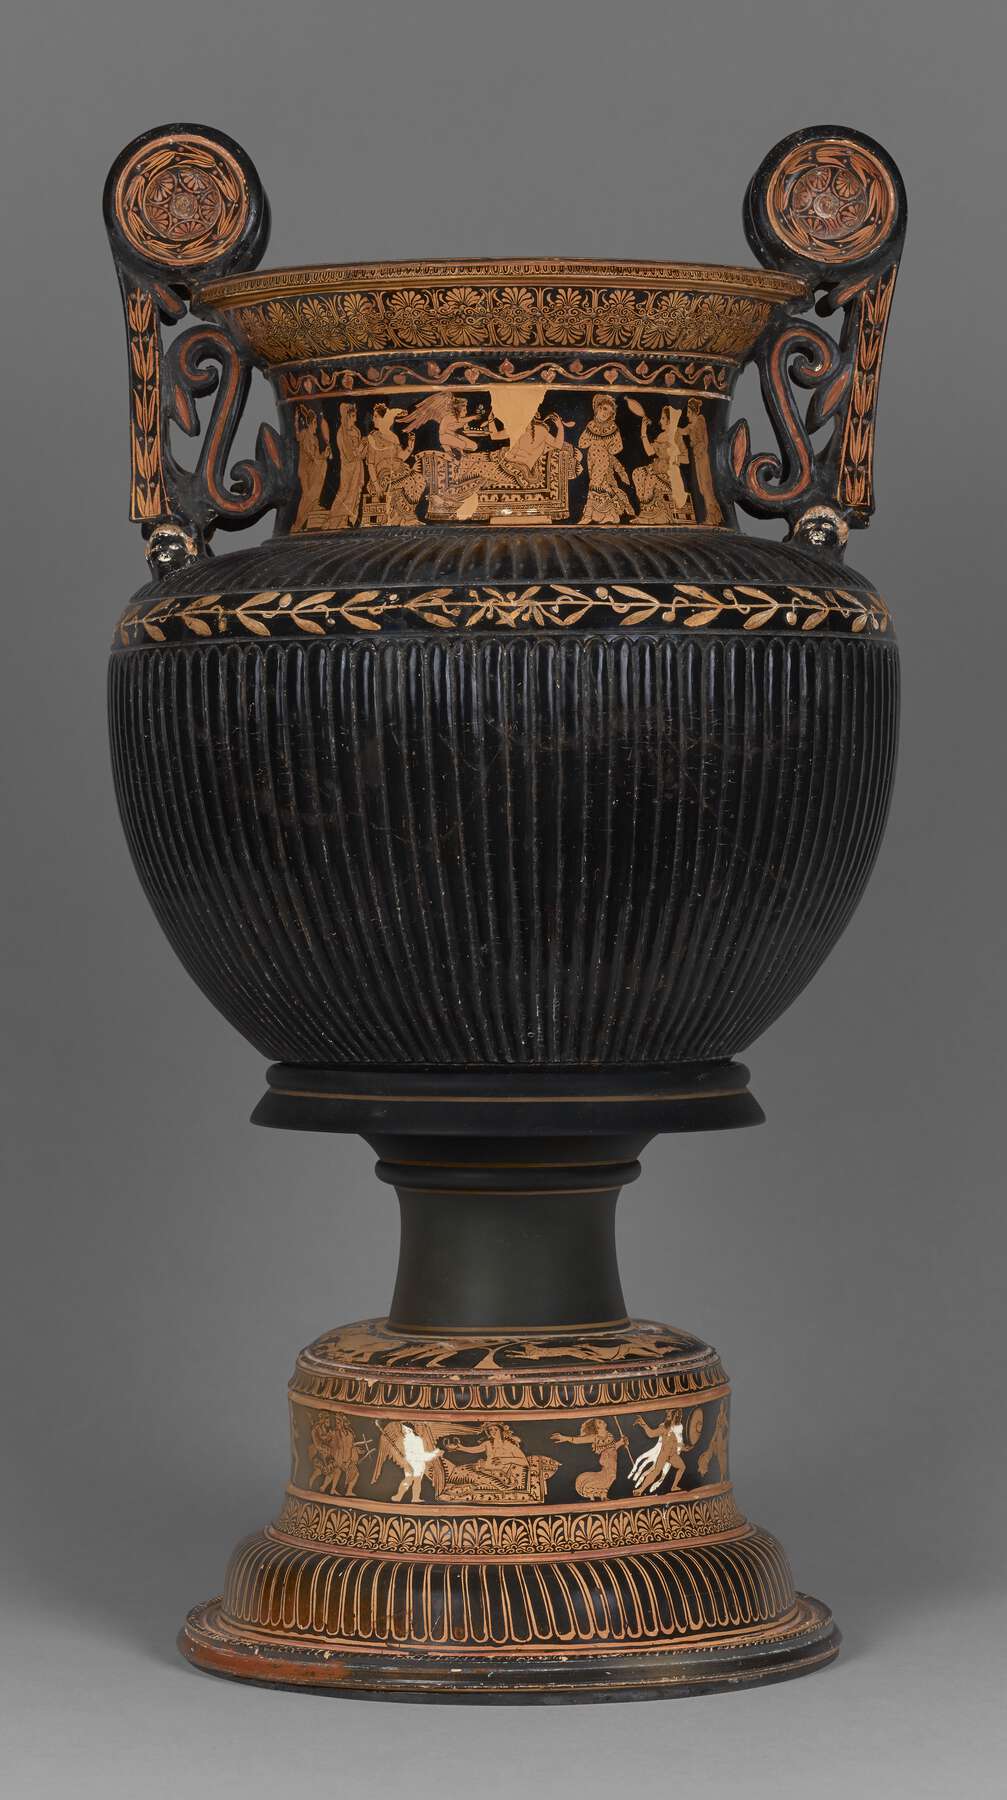 One view of a highly decorated vase with ornate handles